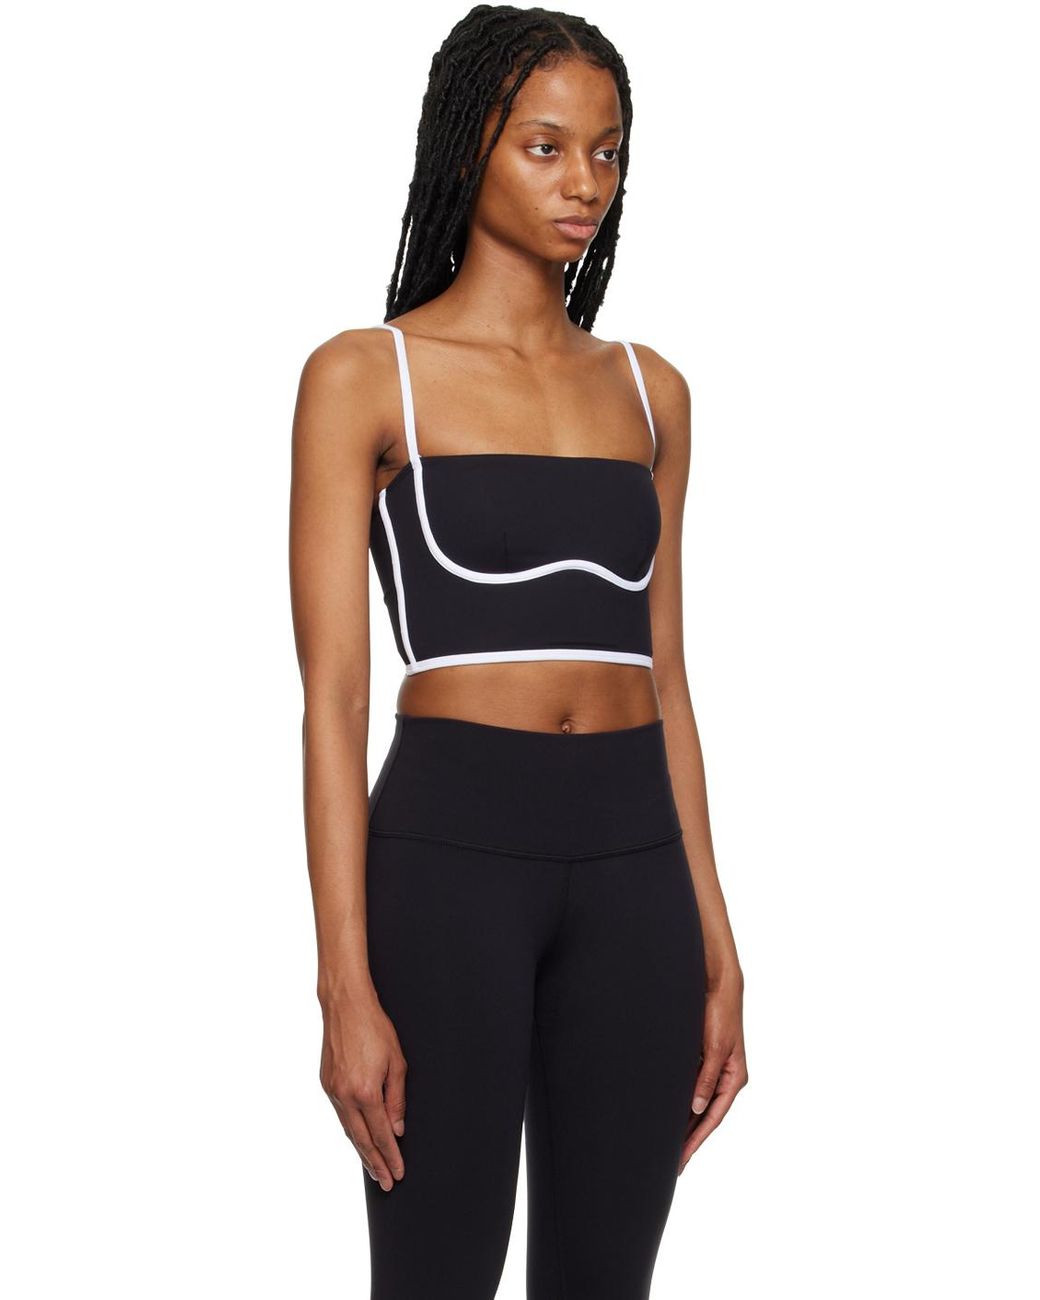 Alo Yoga airbrush streamlined bra tank Black - $34 (46% Off Retail) - From  Haleigh